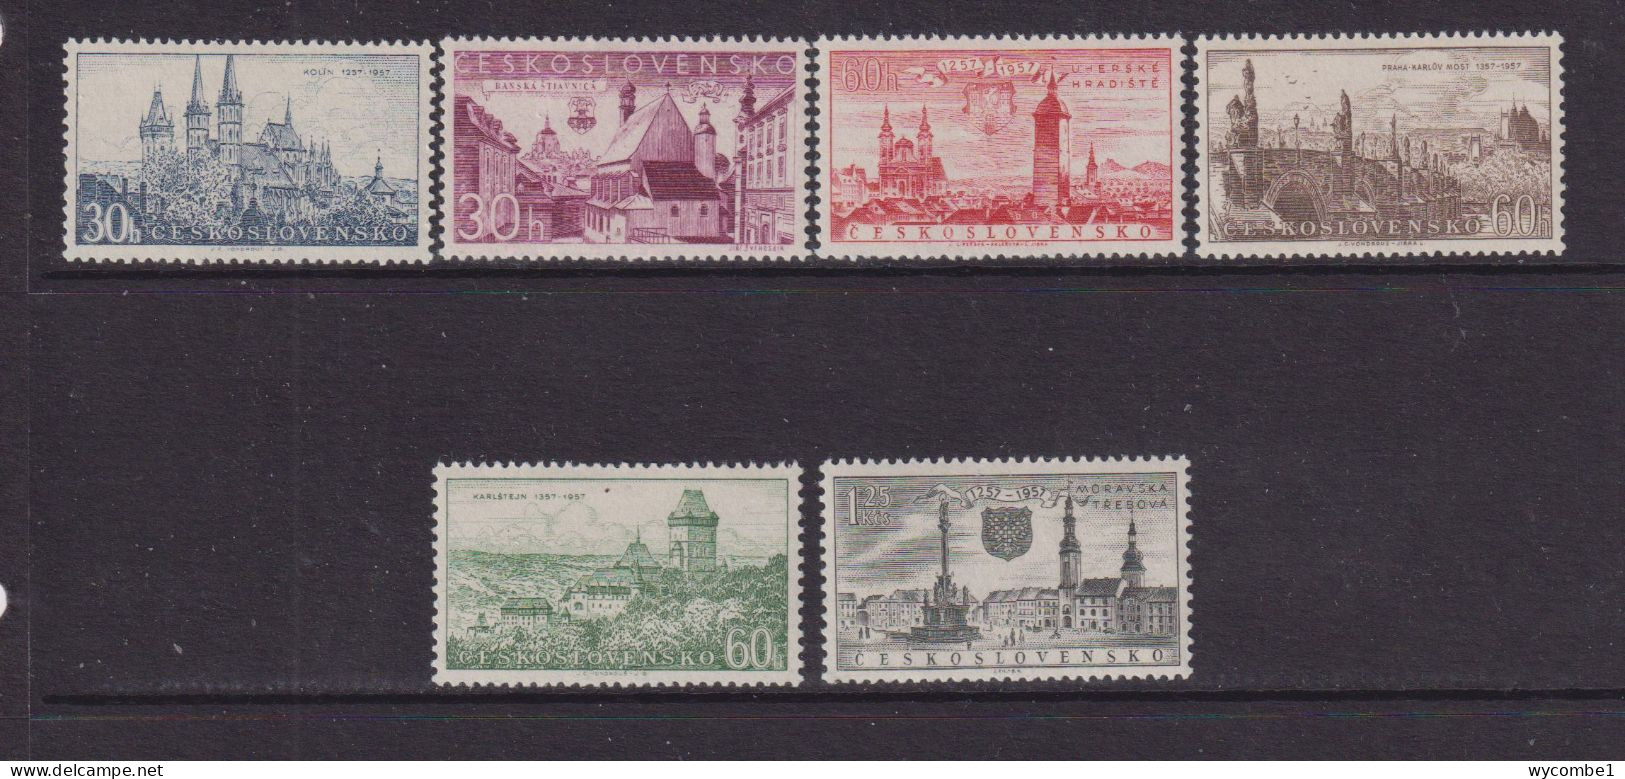 CZECHOSLOVAKIA  - 1957  Towns And Monuments Set  Never Hinged Mint - Unused Stamps